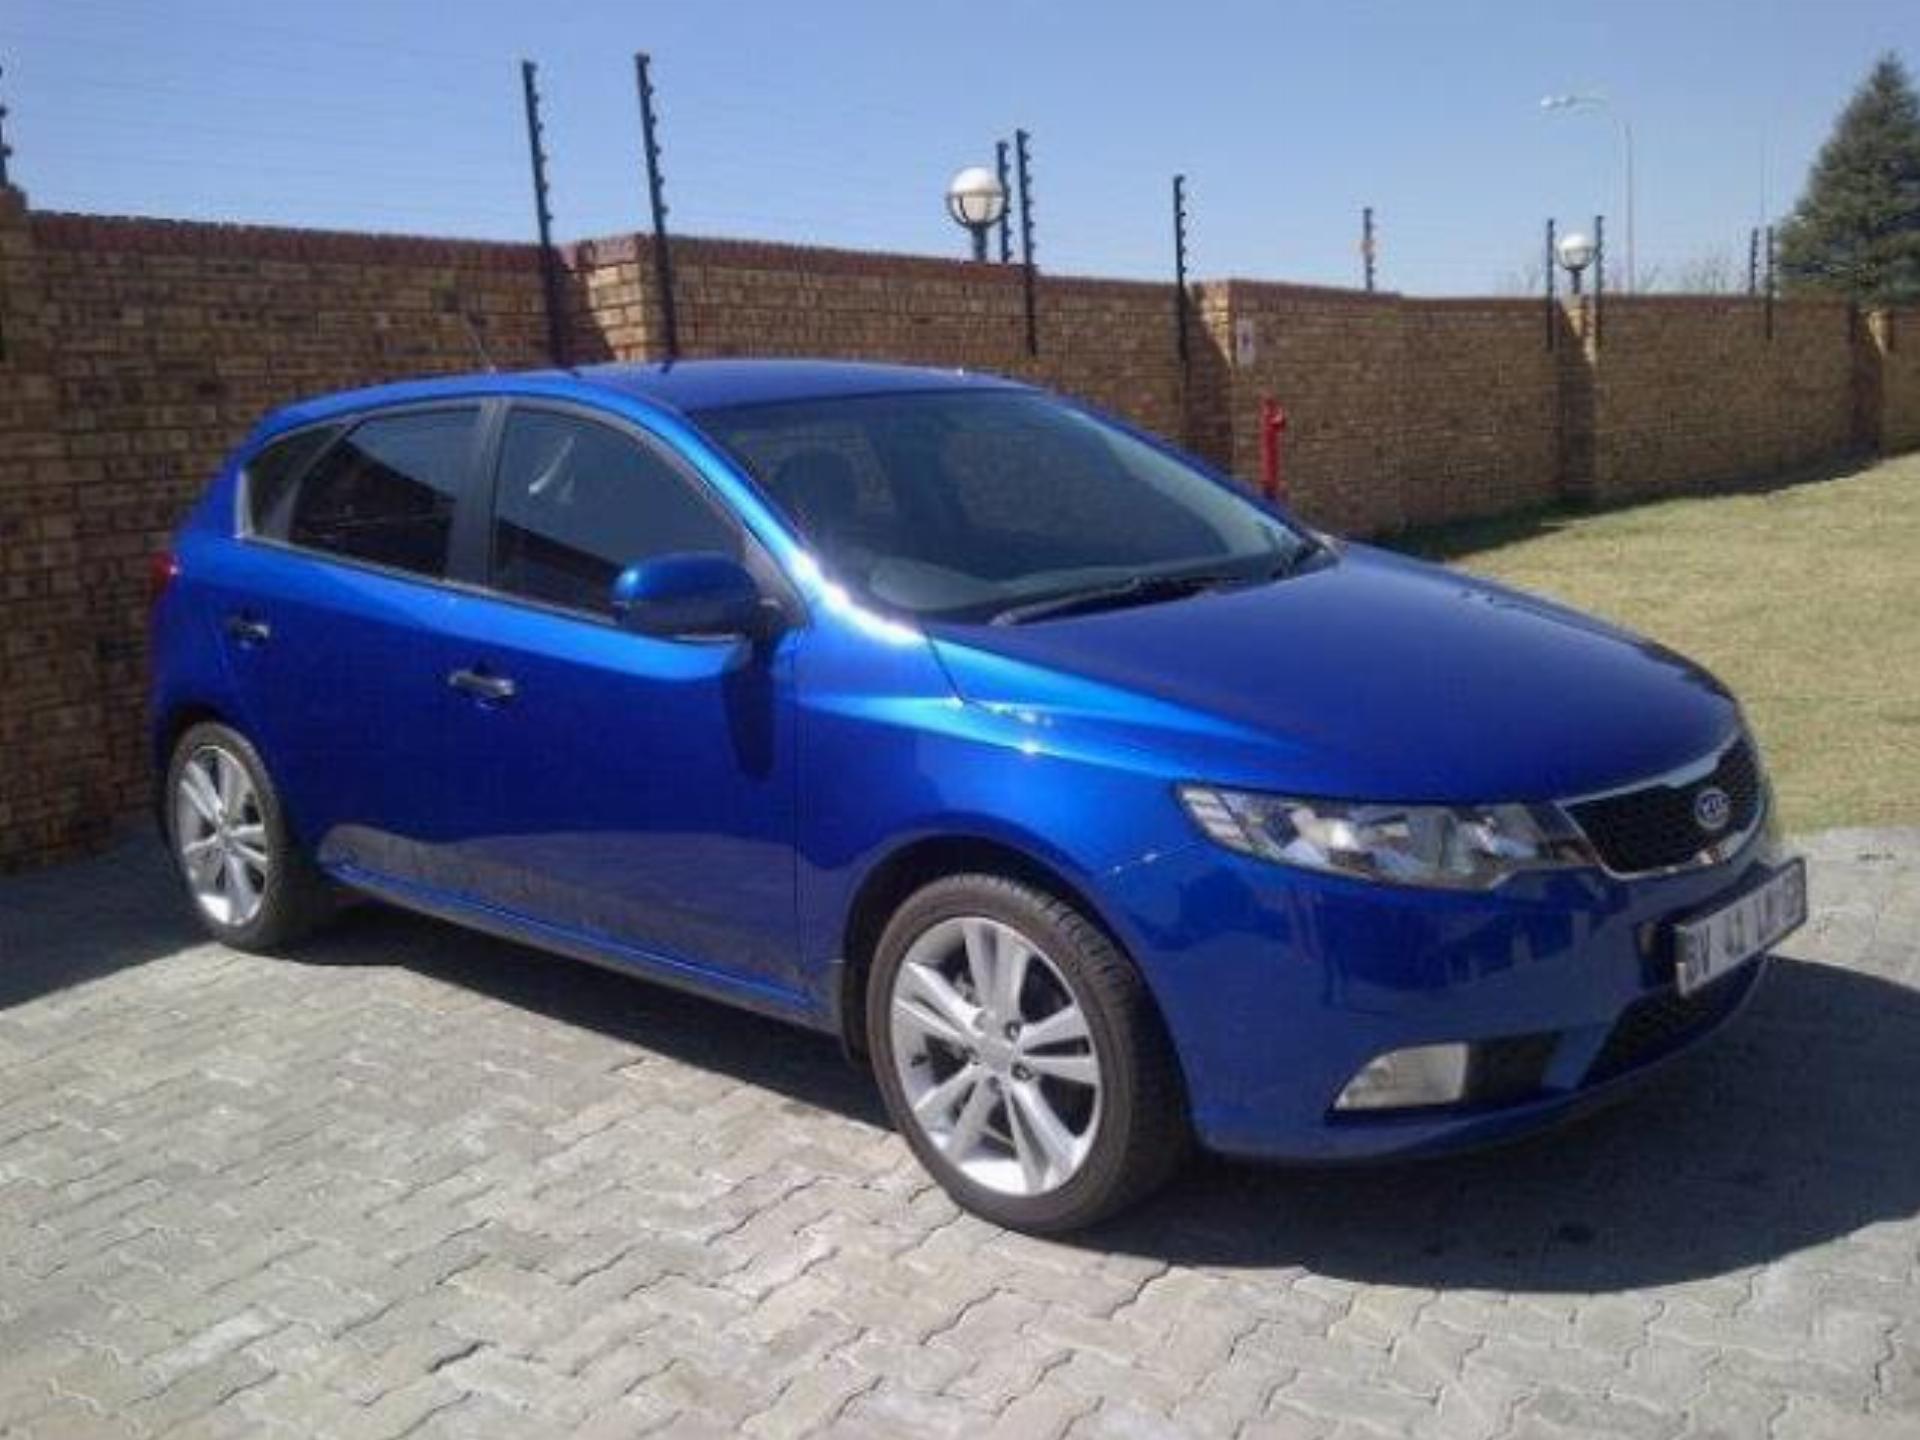 Used Kia Cerato 2.0 5DR 2012 on auction - PV1003858